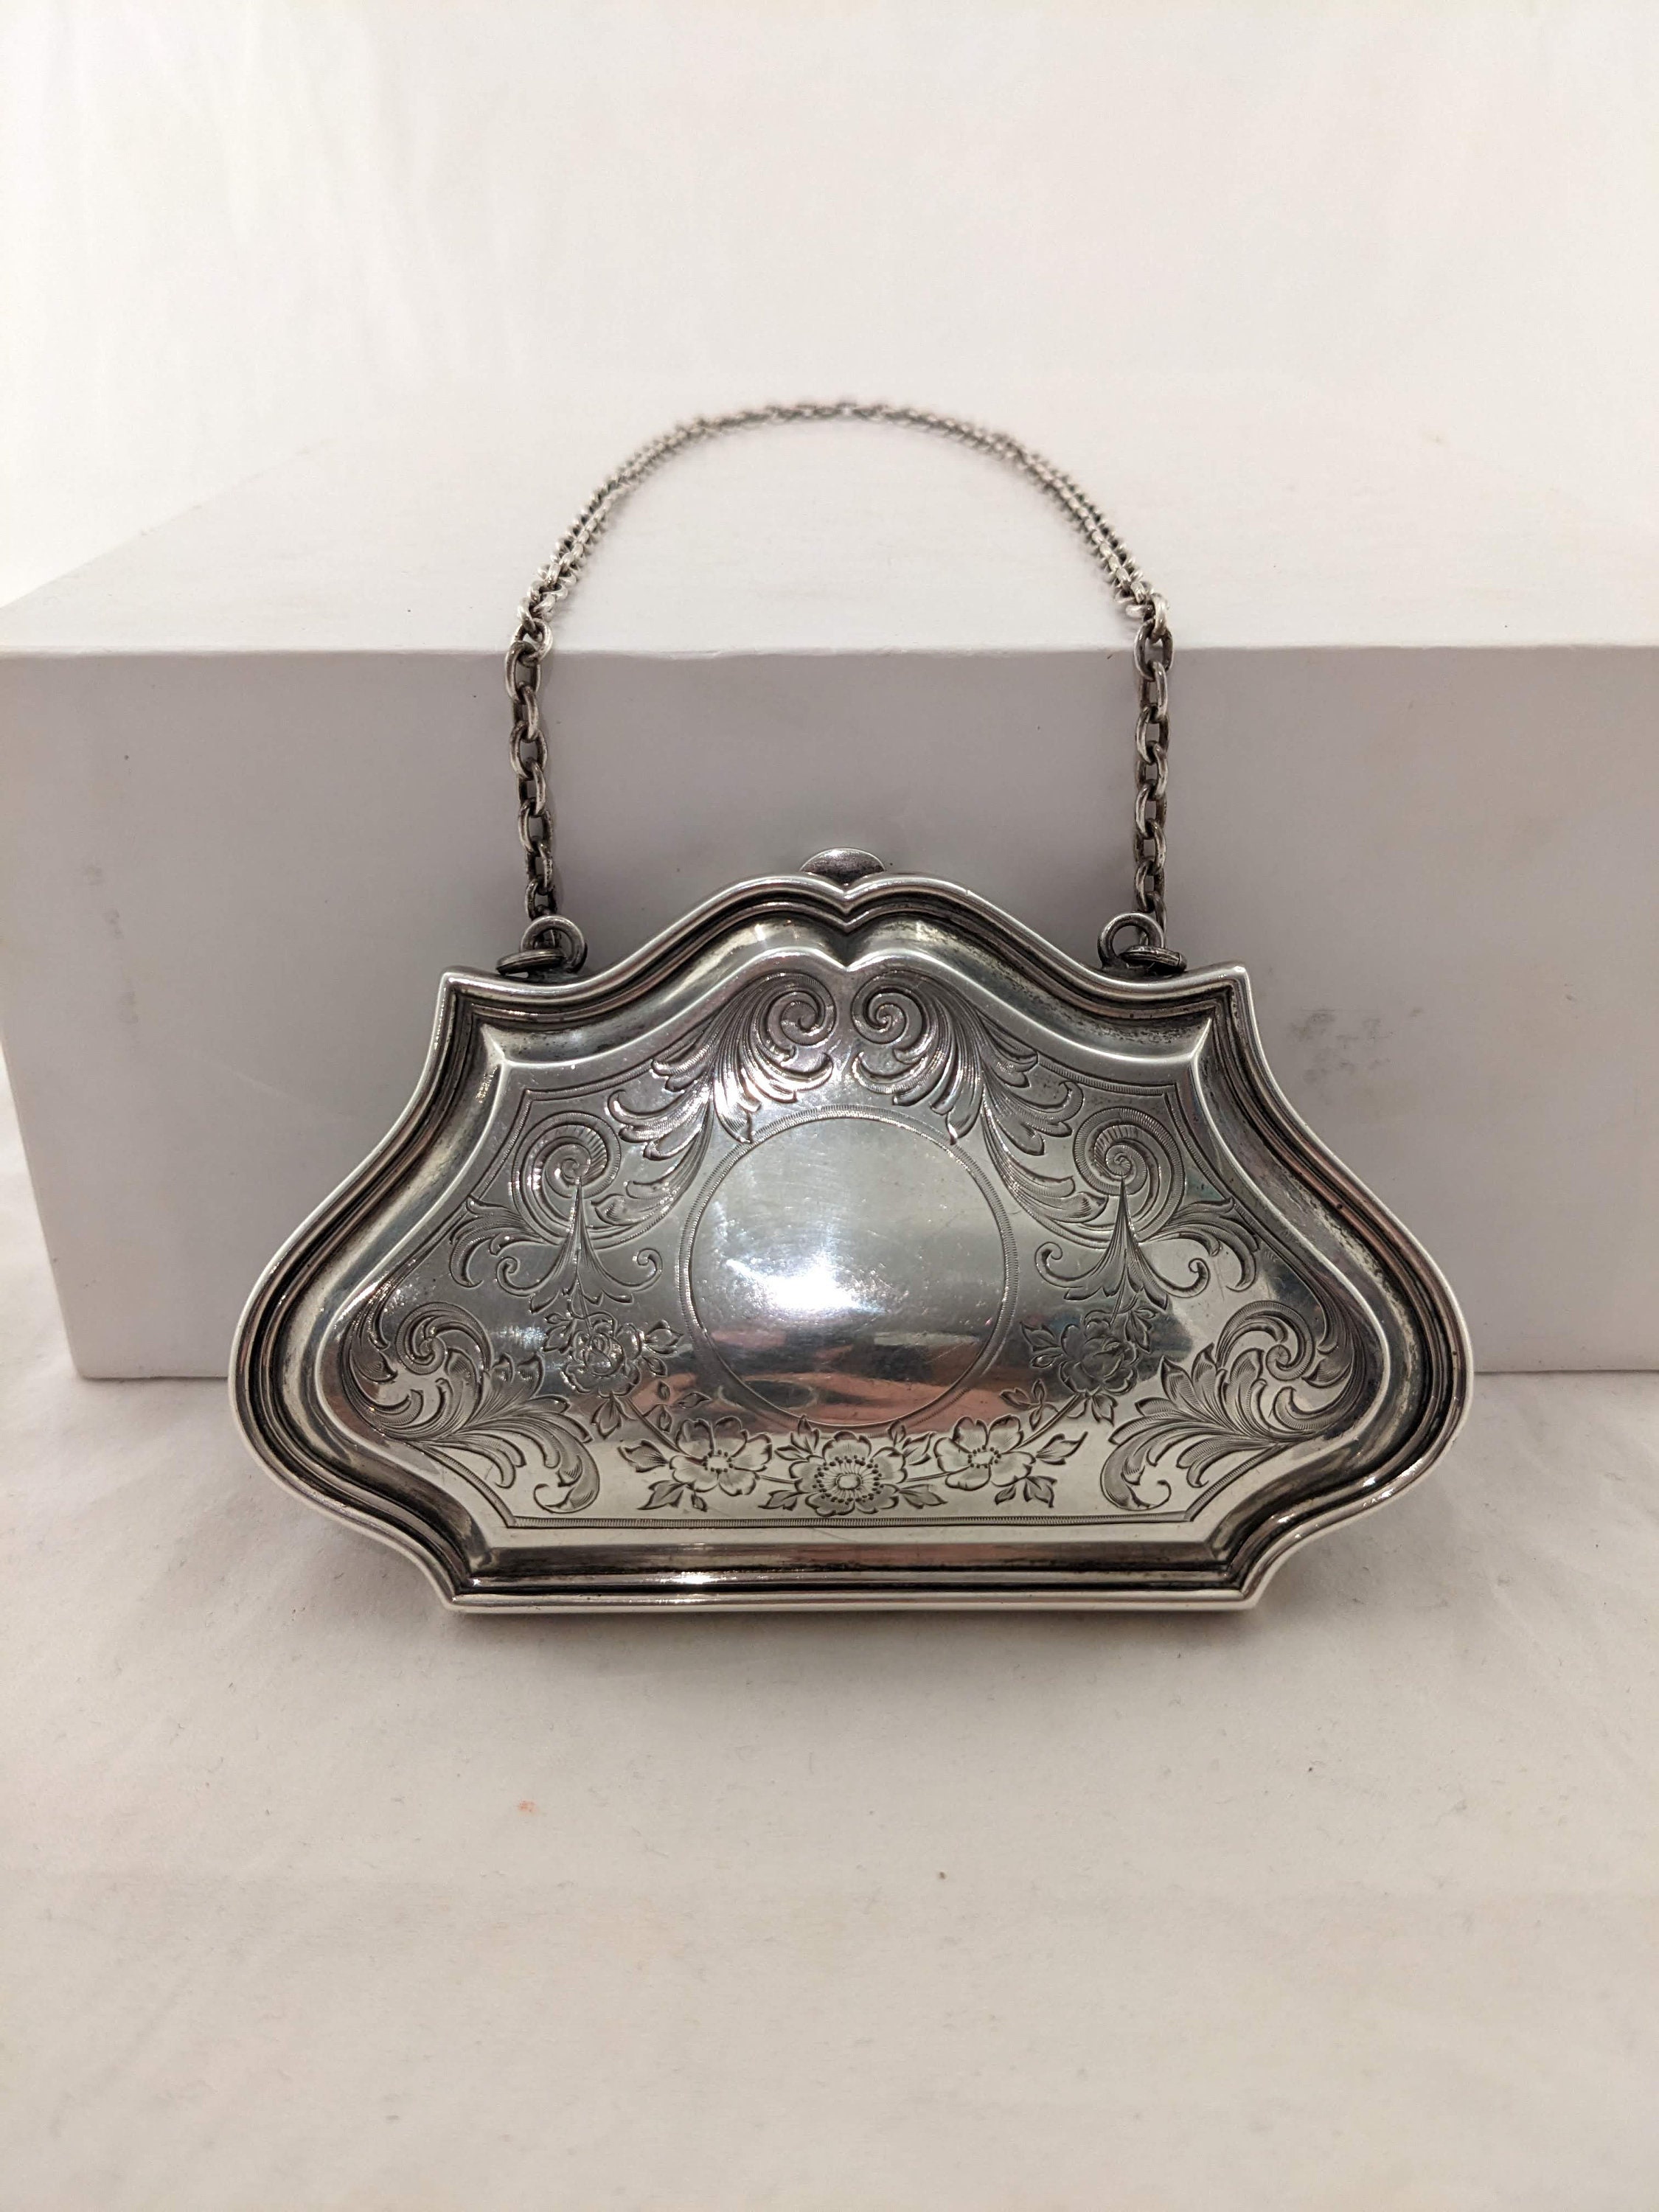 Antique Sterling Silver Compact/Coin Purse - Ruby Lane